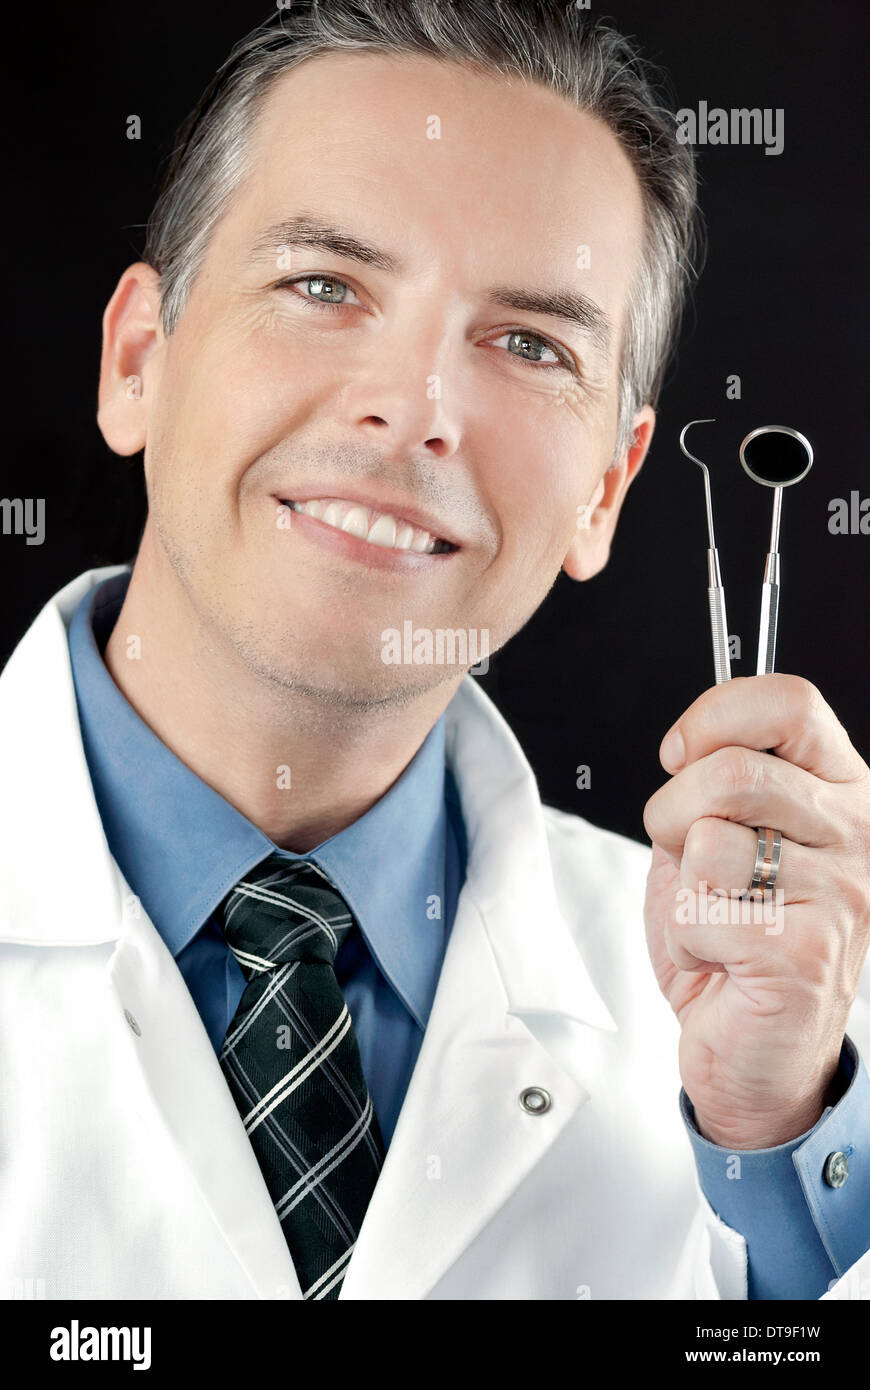 Close-up of a smiling dentist holding his tools Stock Photo